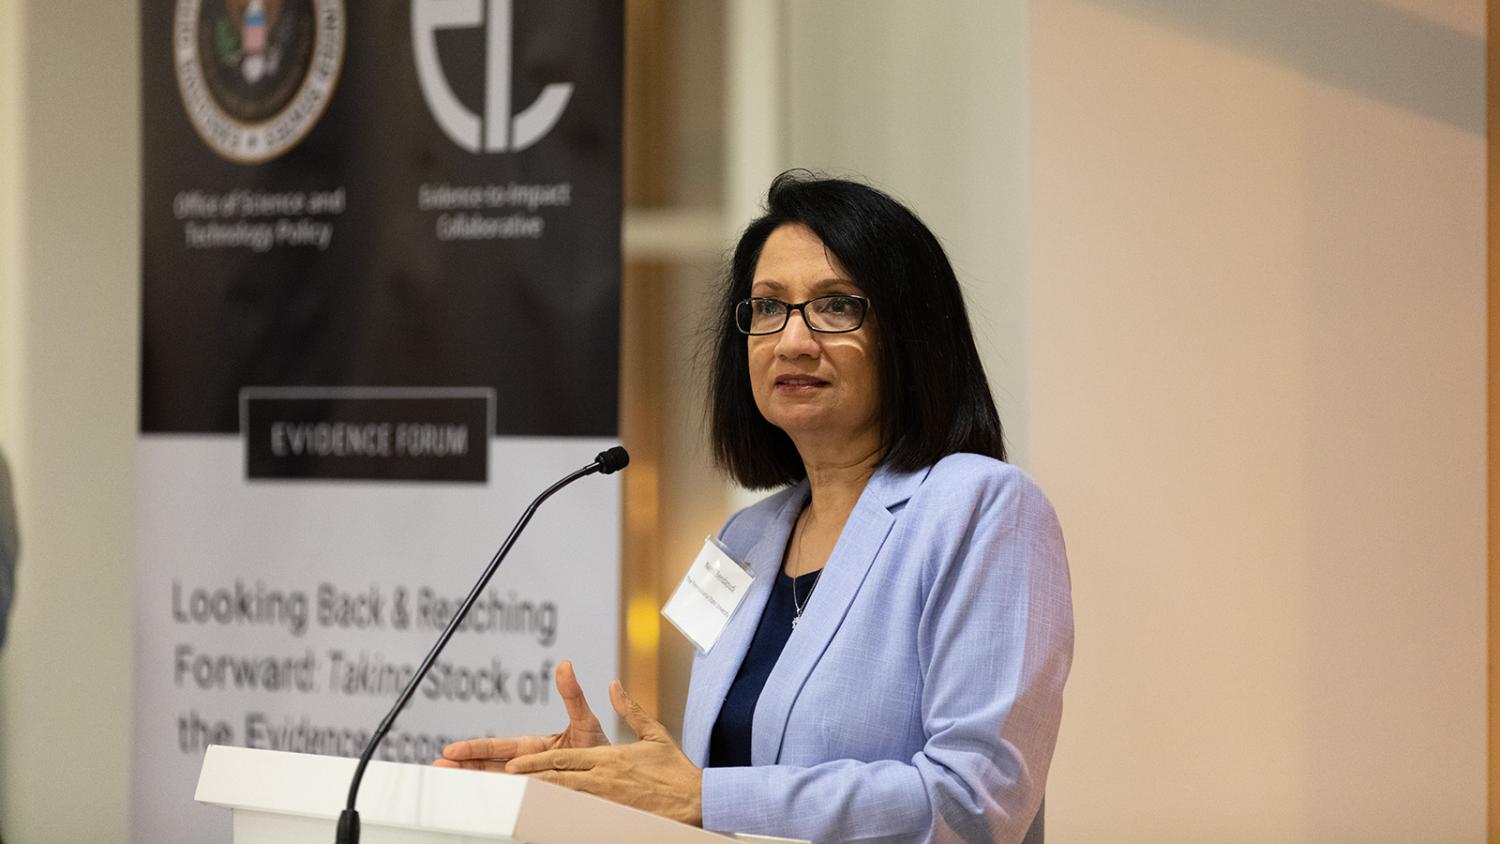 Penn State President Neeli Bendapudi speaks at a podium in front of a banner displaying the White House Office of Science and Technology Policy and Penn State's Evidence-to-Impact Collaborative